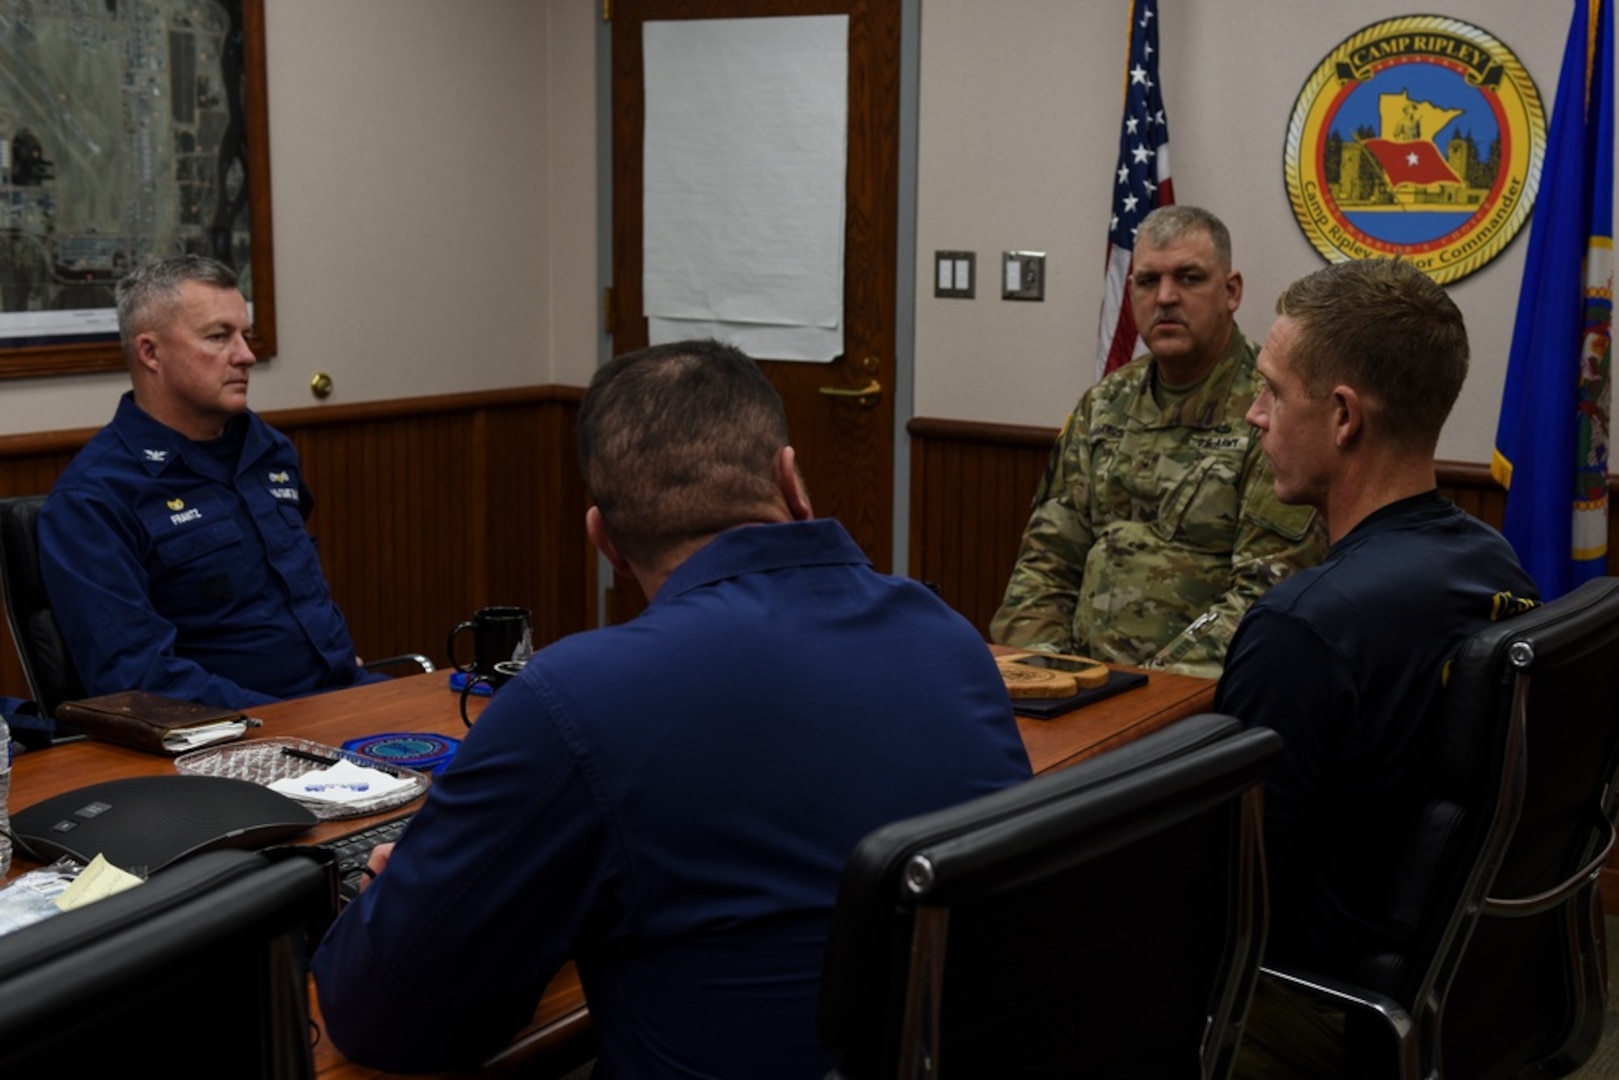 U.S. Coast Guard Capt. Paul Frantz, Lt. Nicholas Pavlik, and Chief Warrant Officer Sean Eversole meet with U.S. Army Brig. Gen. Lowell Kruse, senior commander of Camp Ripley Training Center, Feb. 2, 2022, at Camp Ripley, Minnesota. The Coast Guard and the National Guard worked together to coordinate the logistics of the Cold Water Ice Diving course. (U.S. Coast Guard photo by Petty Officer 3rd Class Jessica Fontenette)